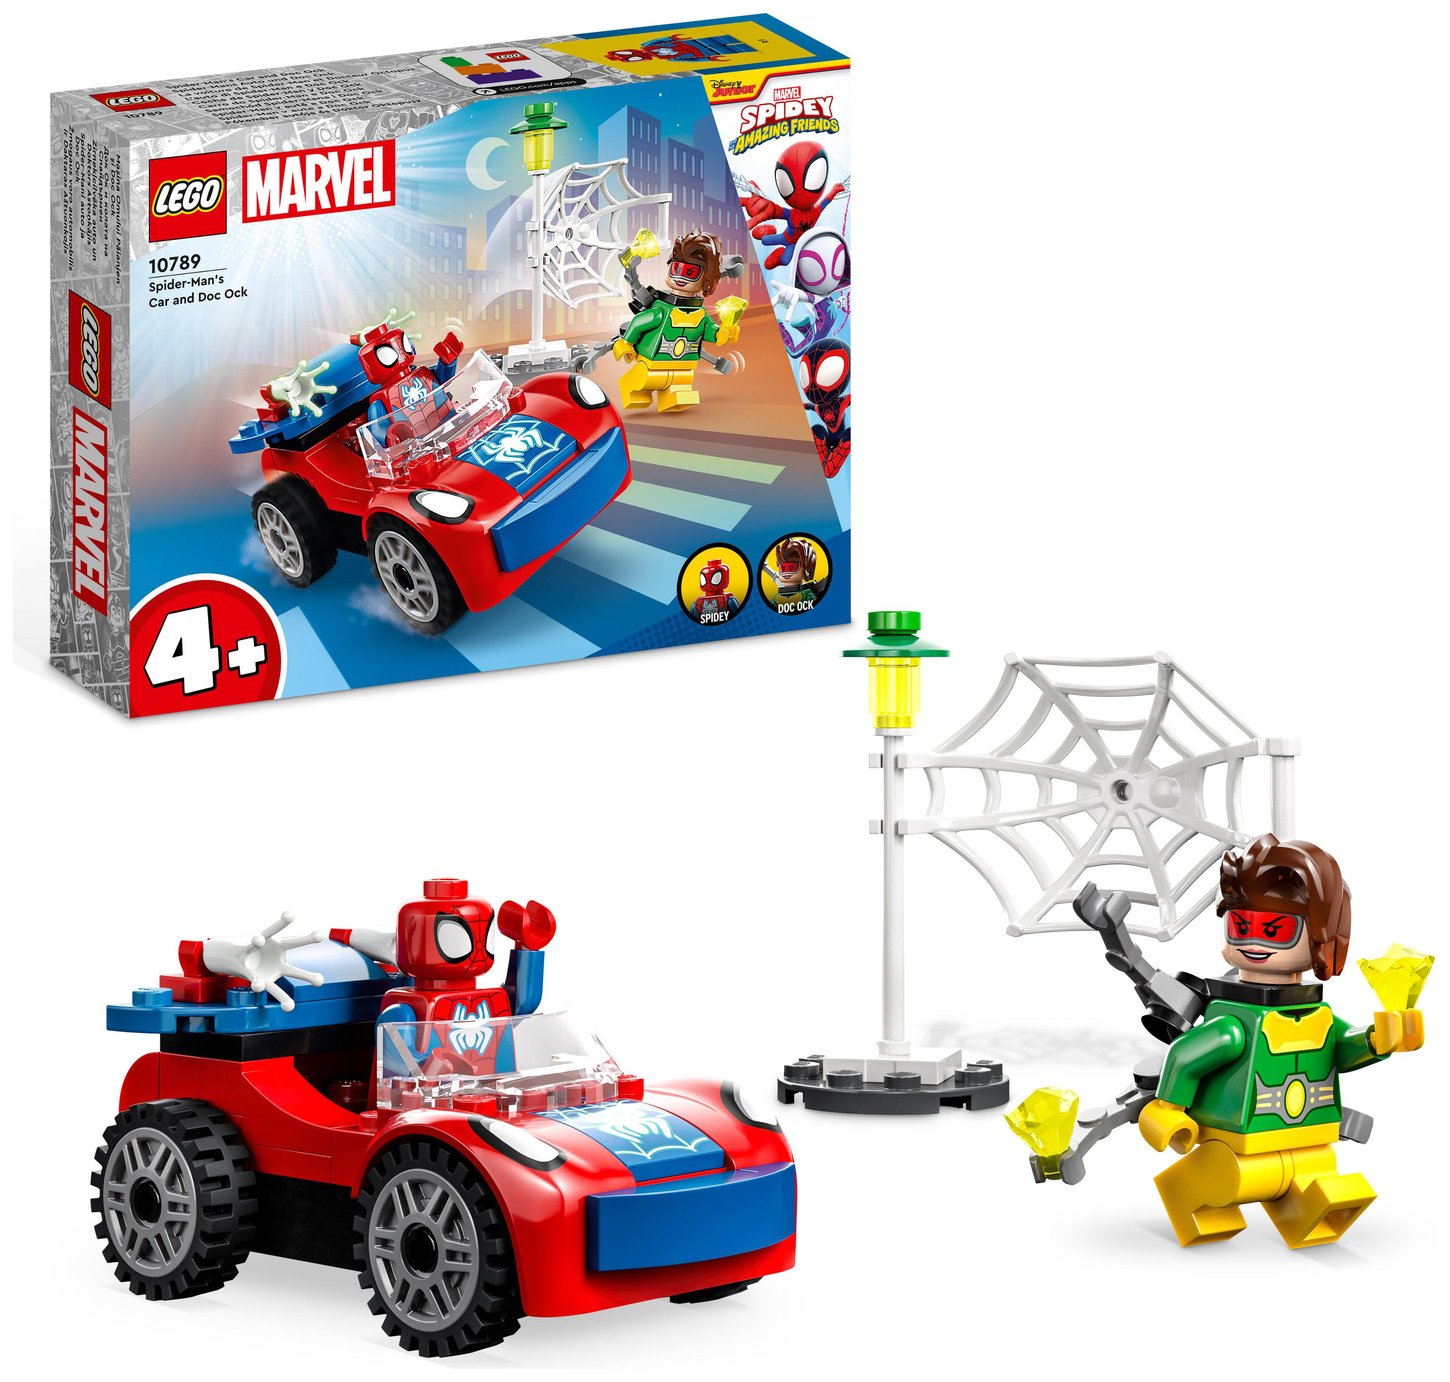 LEGO Marvel Spider-Man\'s Car and Doc Ock Building Toy 10789